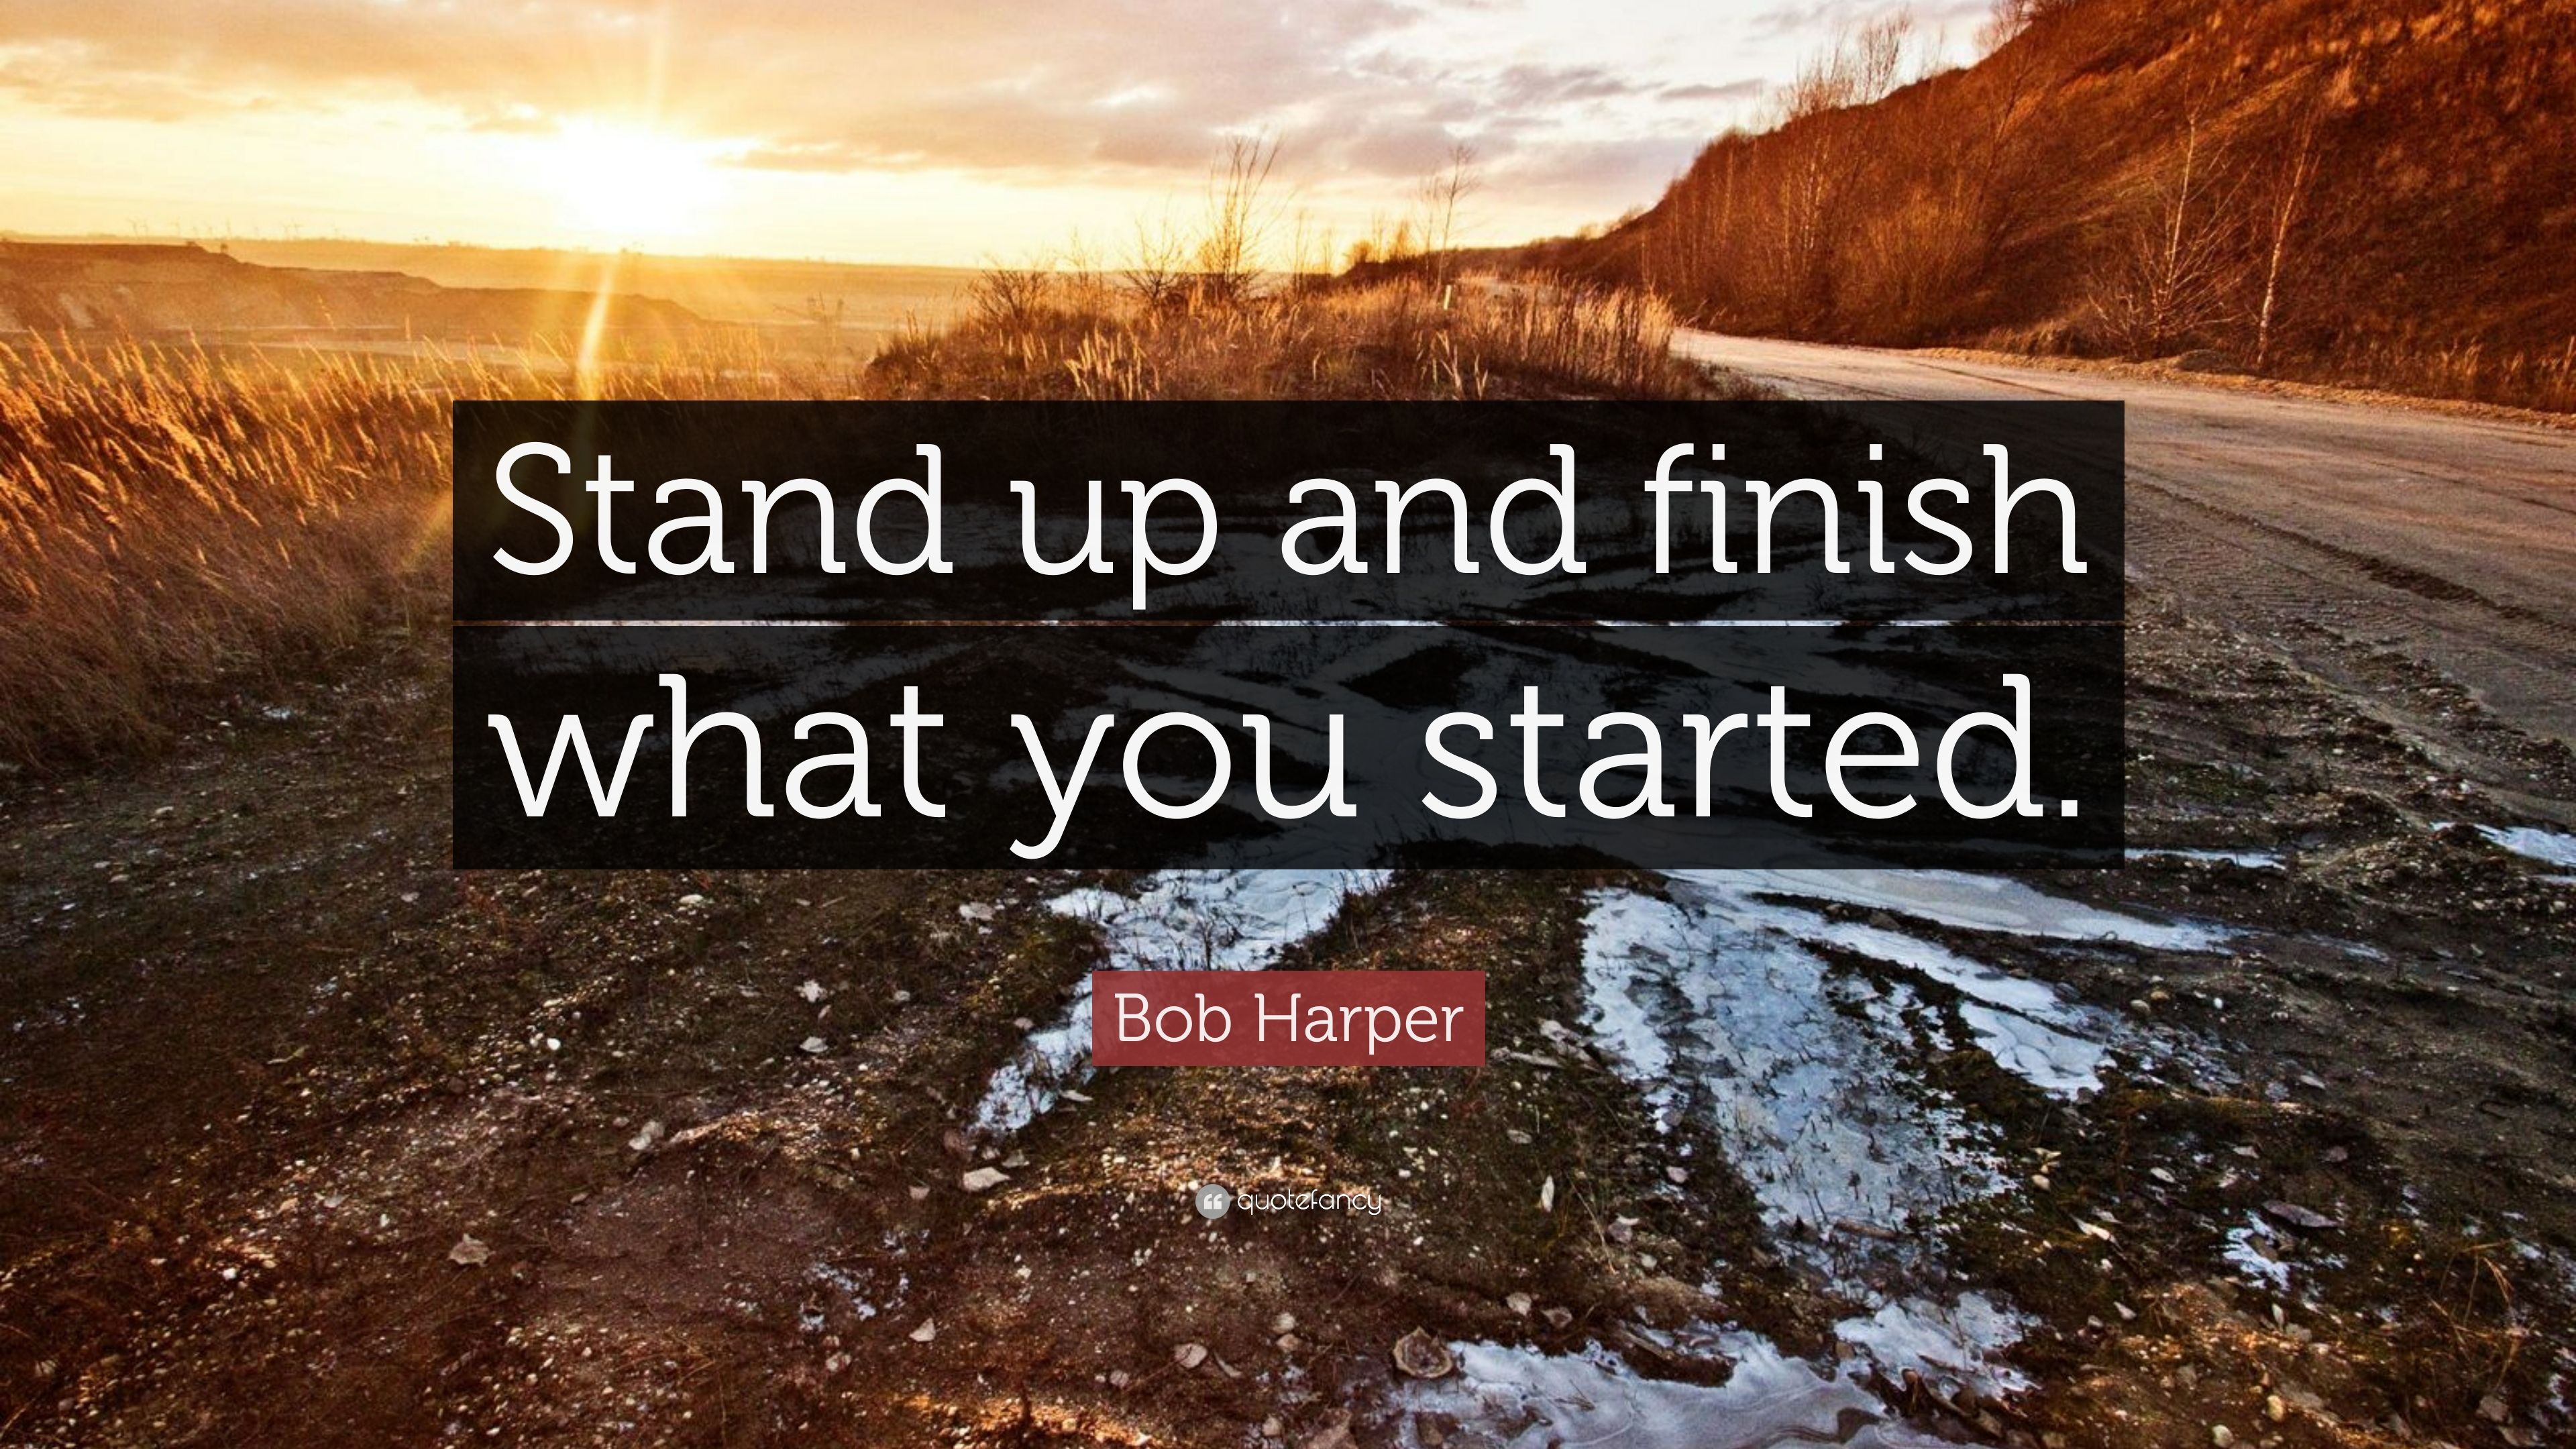 Bob Harper Quote: “Stand up and finish what you started.” 7